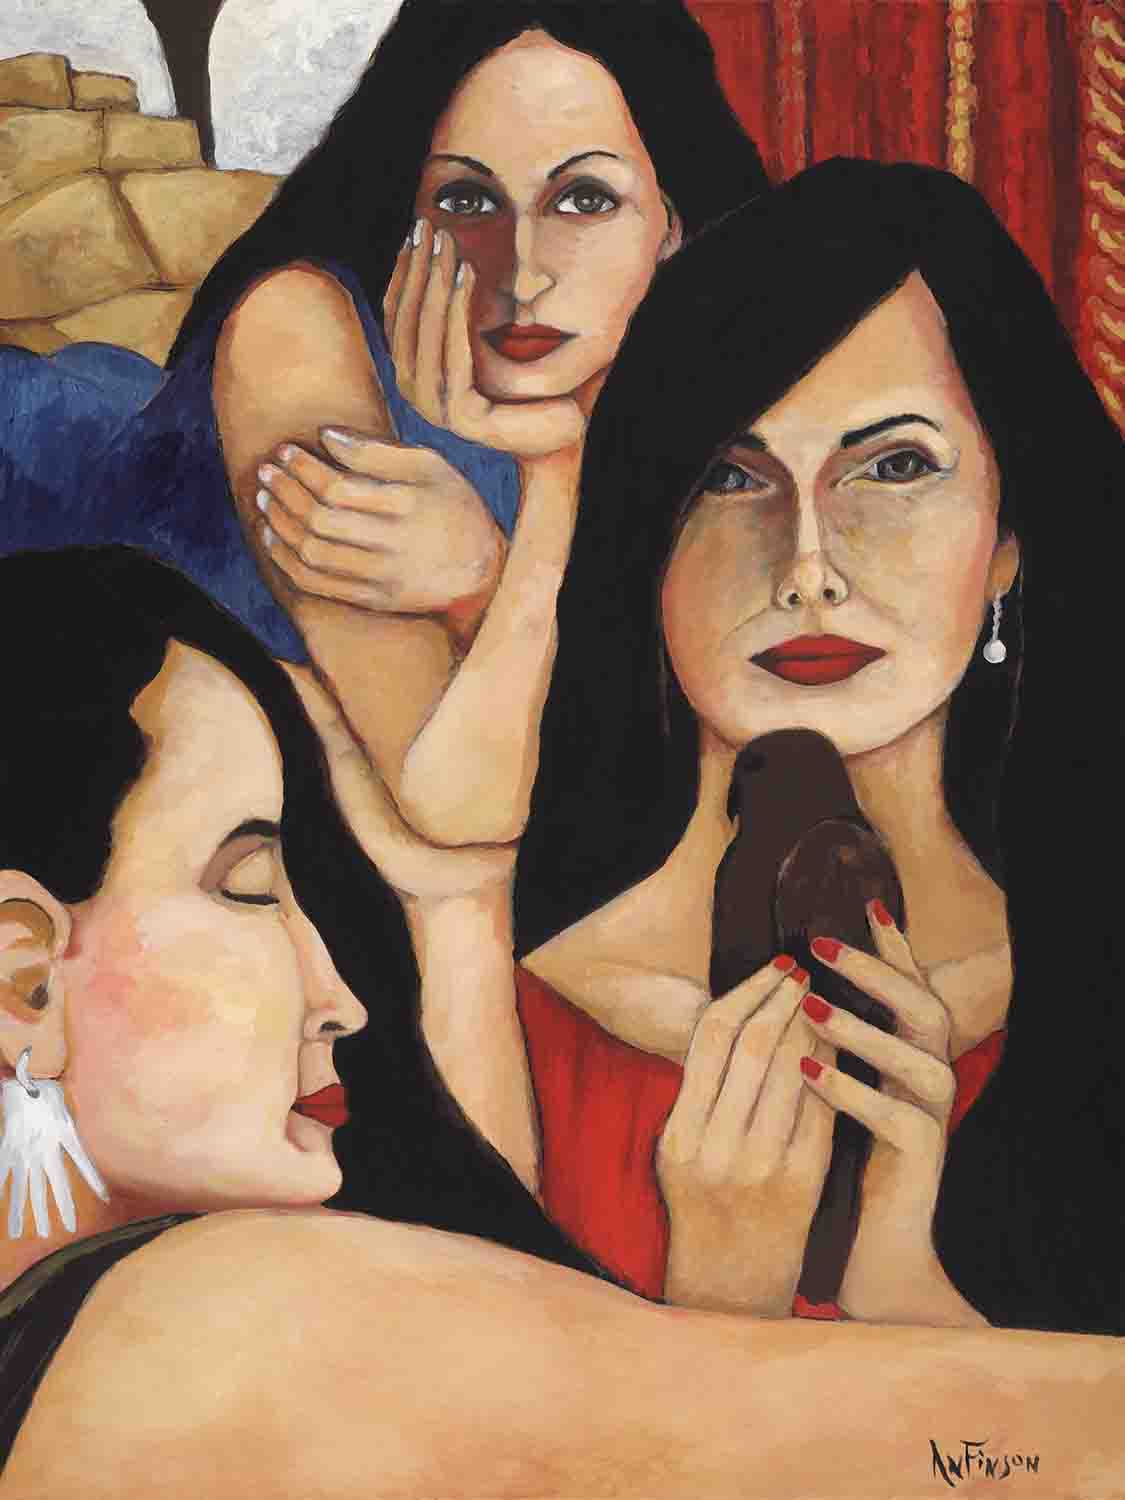  generations again  private collection  48 x 40 2012 